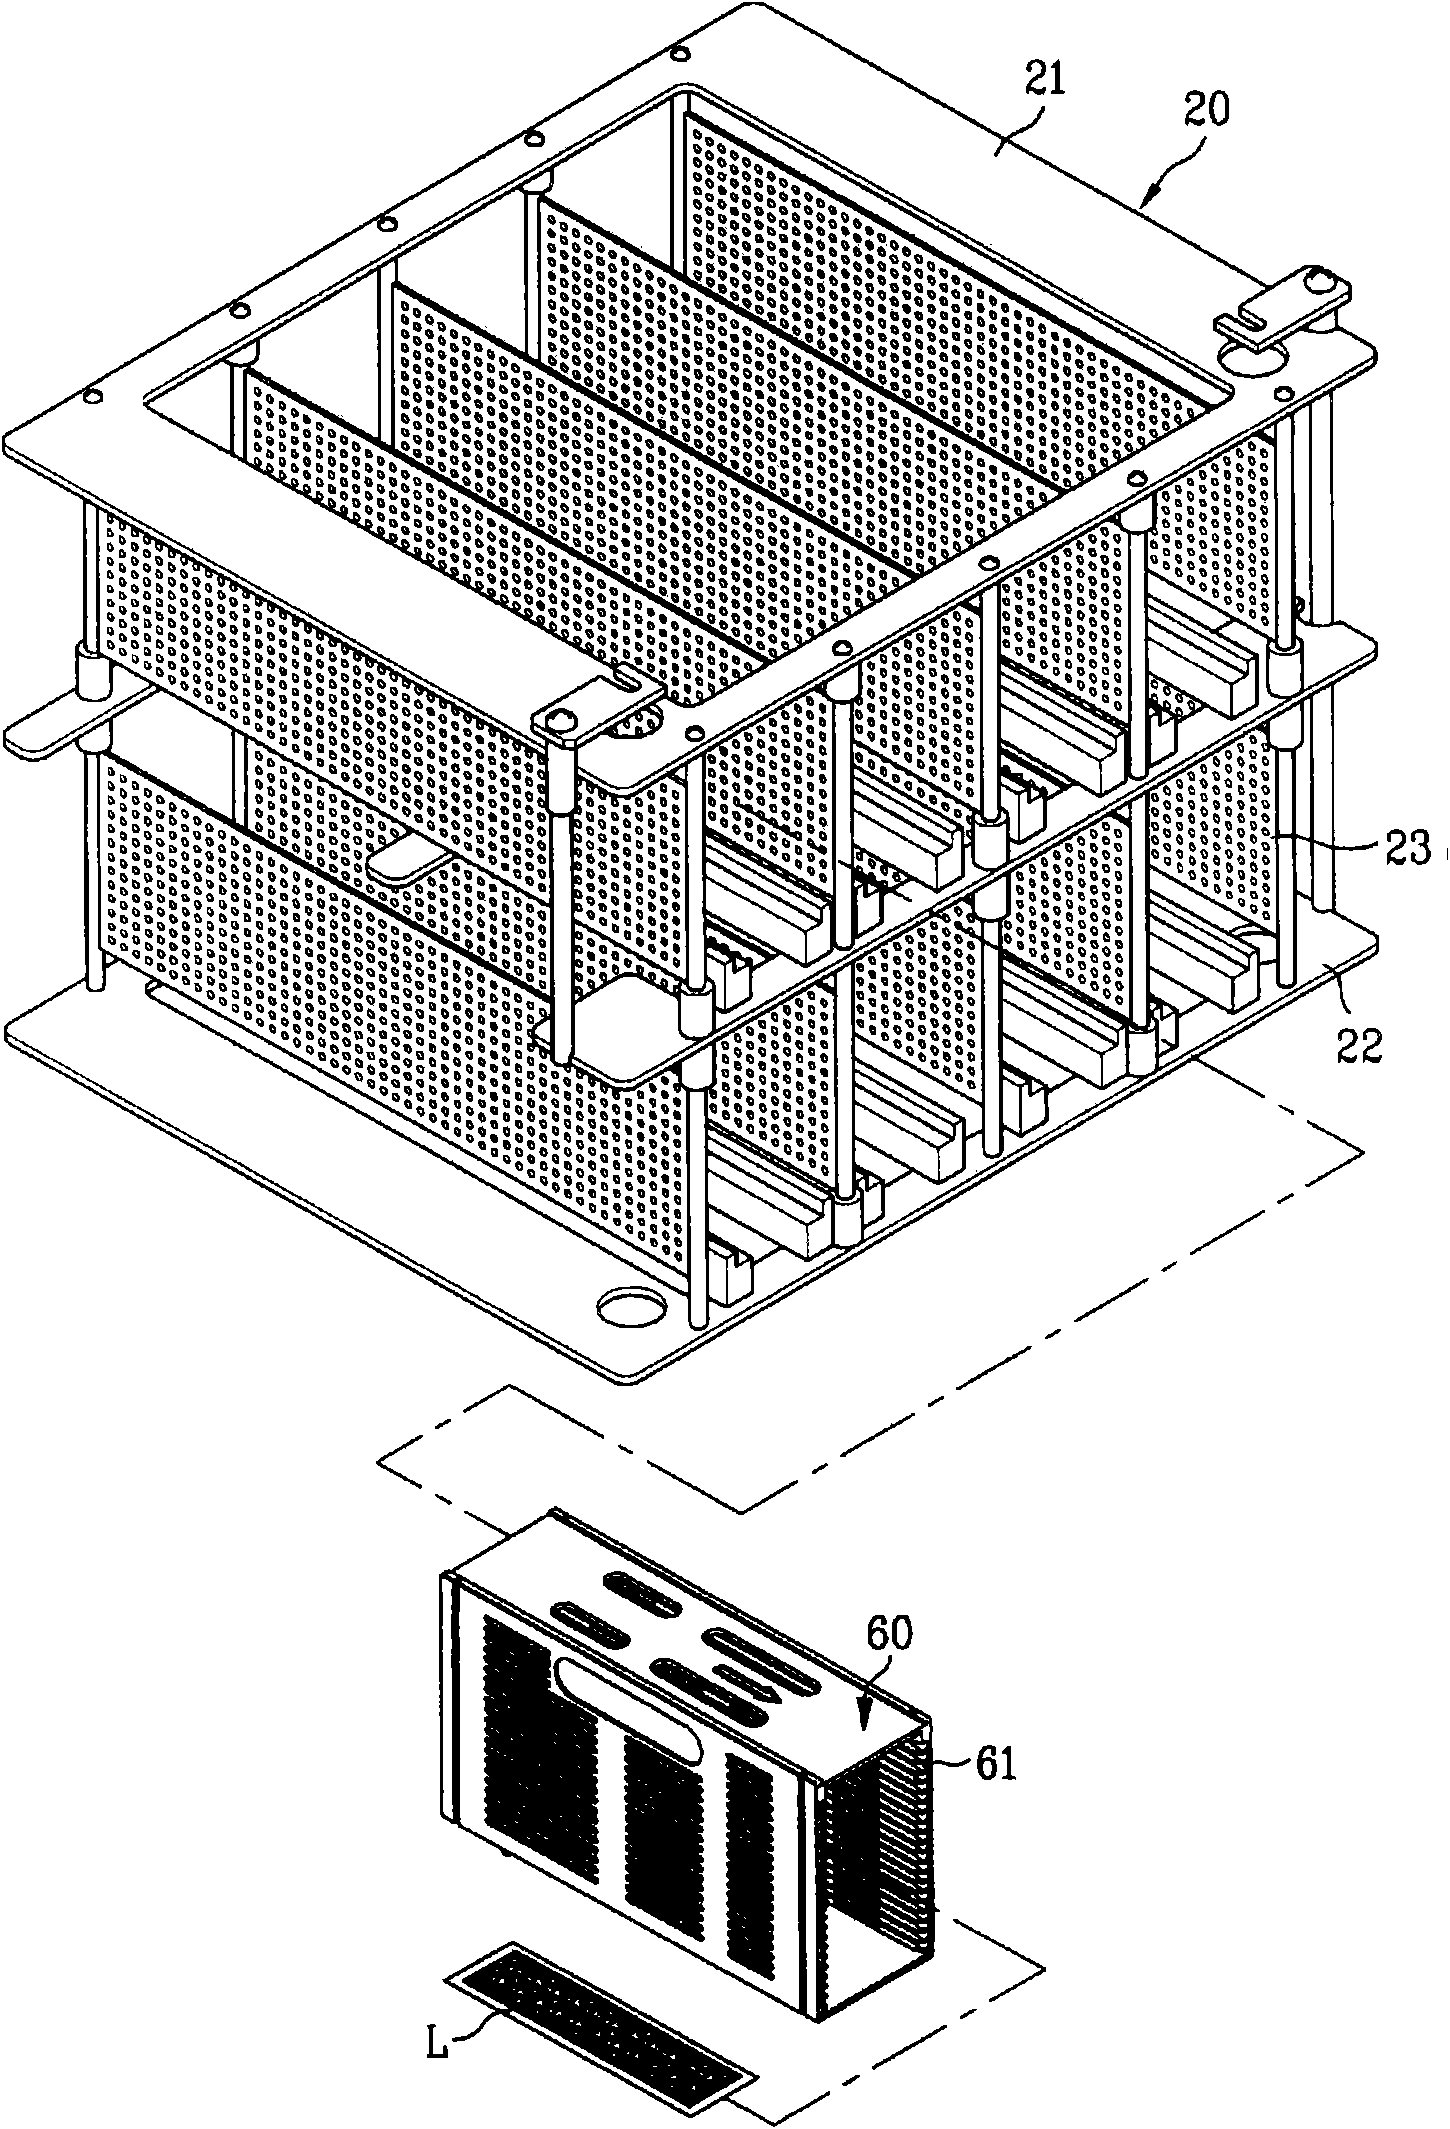 Plasma cleaning apparatus for a semiconductor panel with cleaning chambers